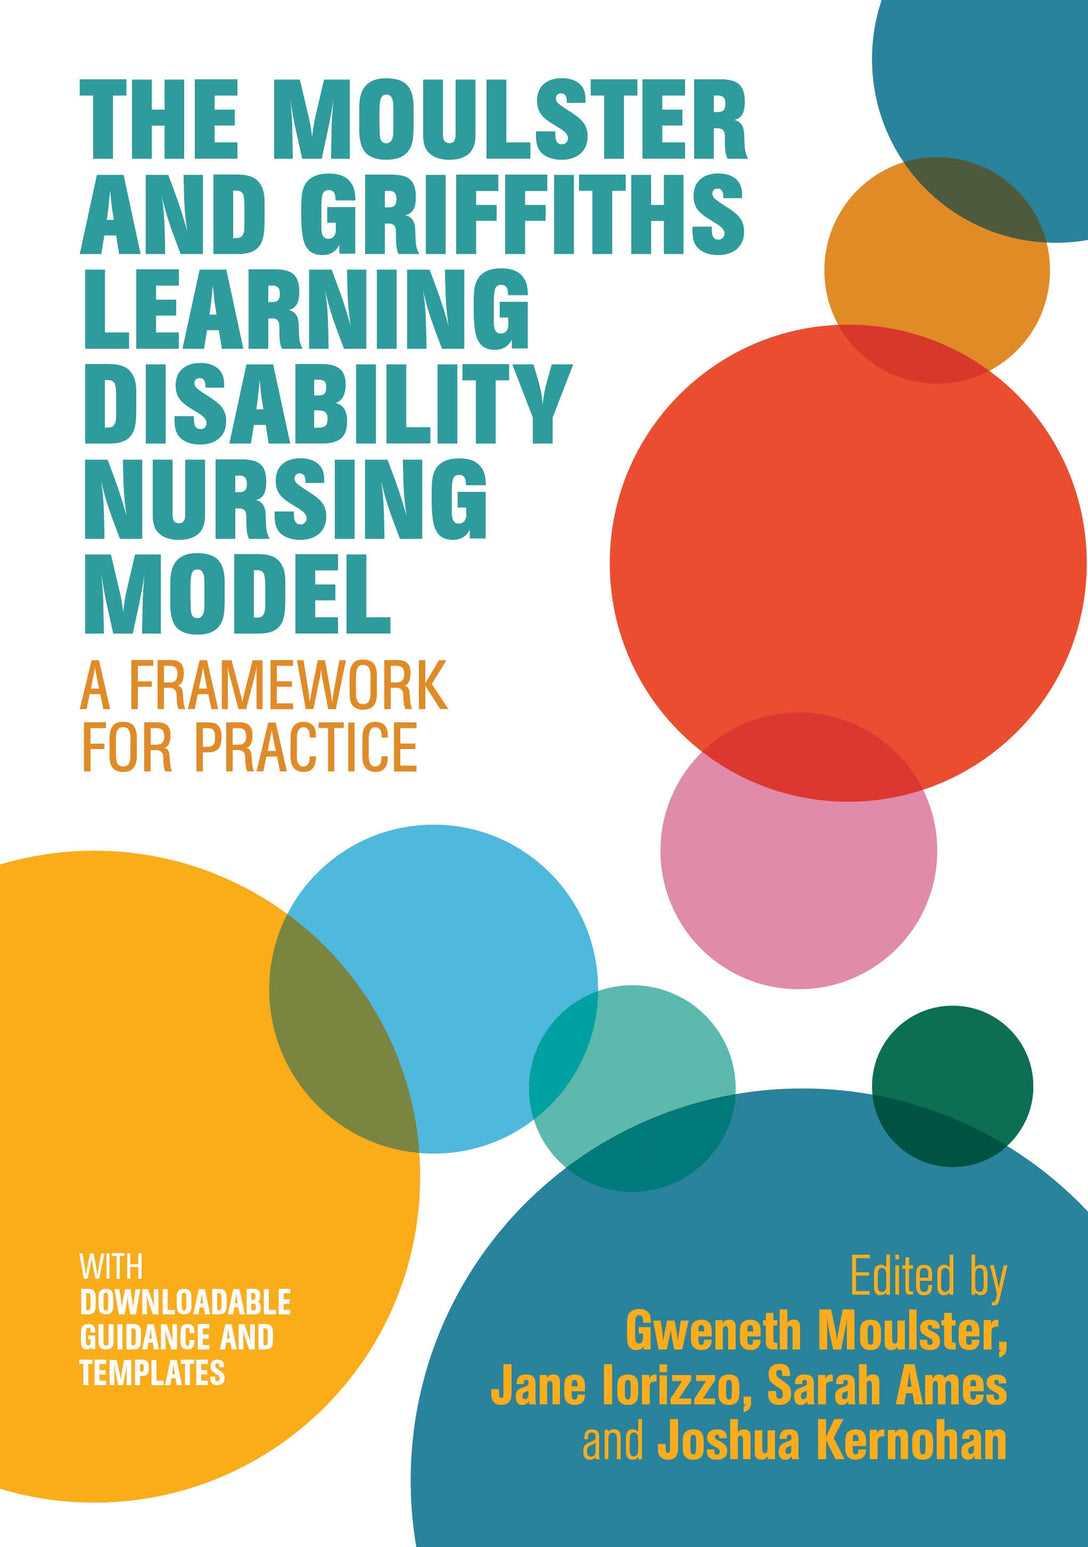 The Moulster and Griffiths Learning Disability Nursing Model by Gweneth Moulster, Jane Iorizzo, Sarah Ames, Joshua Kernohan, No Author Listed, Hayley Goleniowska, Tom Griffiths, Helen Laverty, Emily Smith